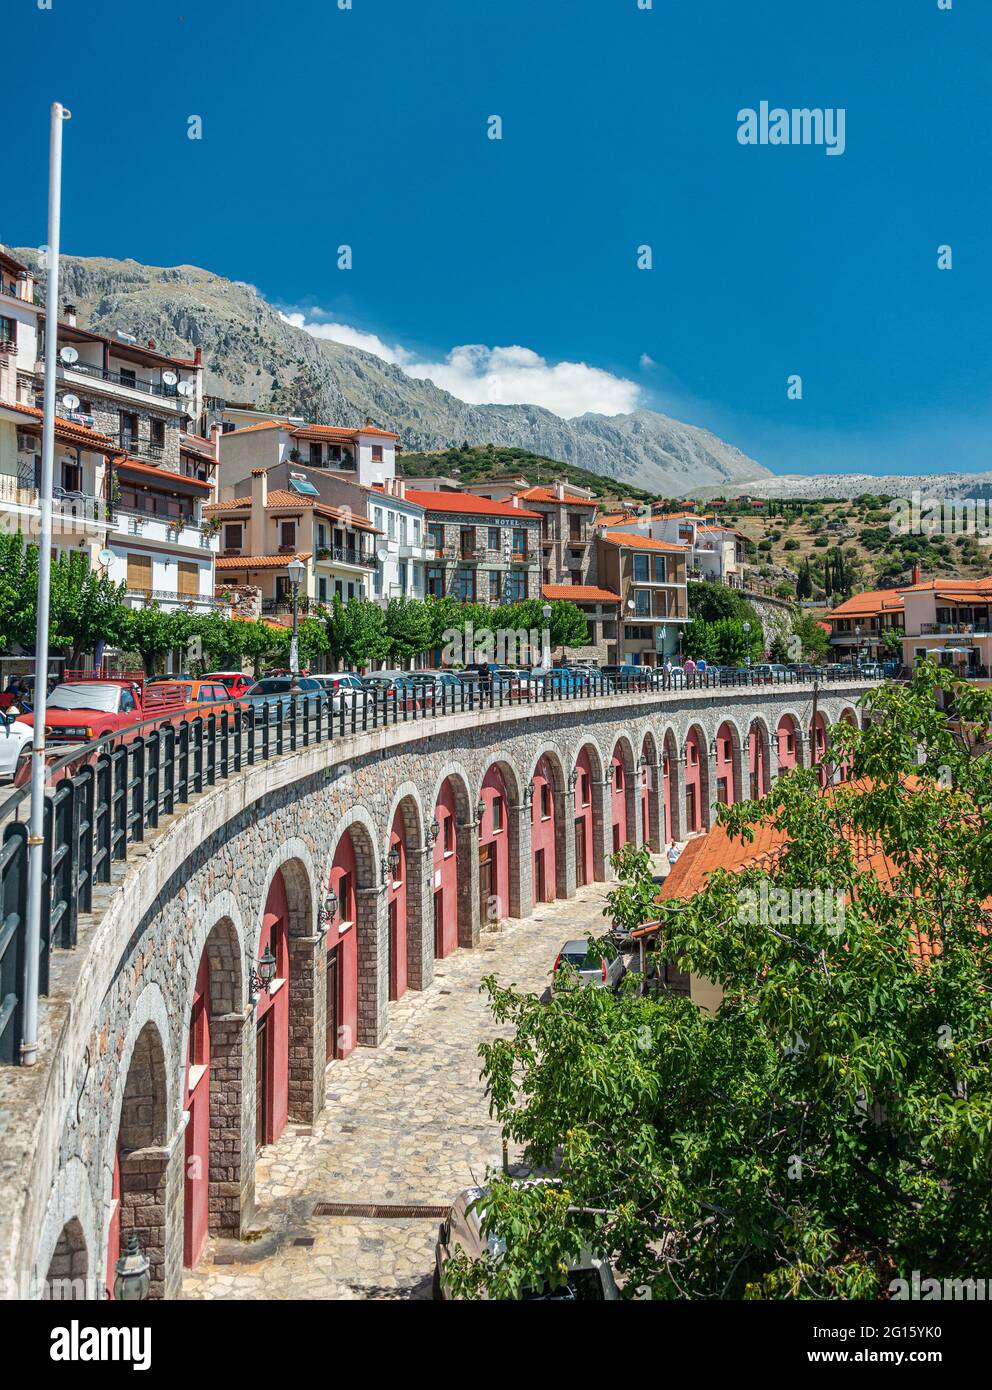 Cobbled alley and stone houses in the mountain town of Arachova at the foot of Mount Parnassos in Viotia, Greece Stock Photo